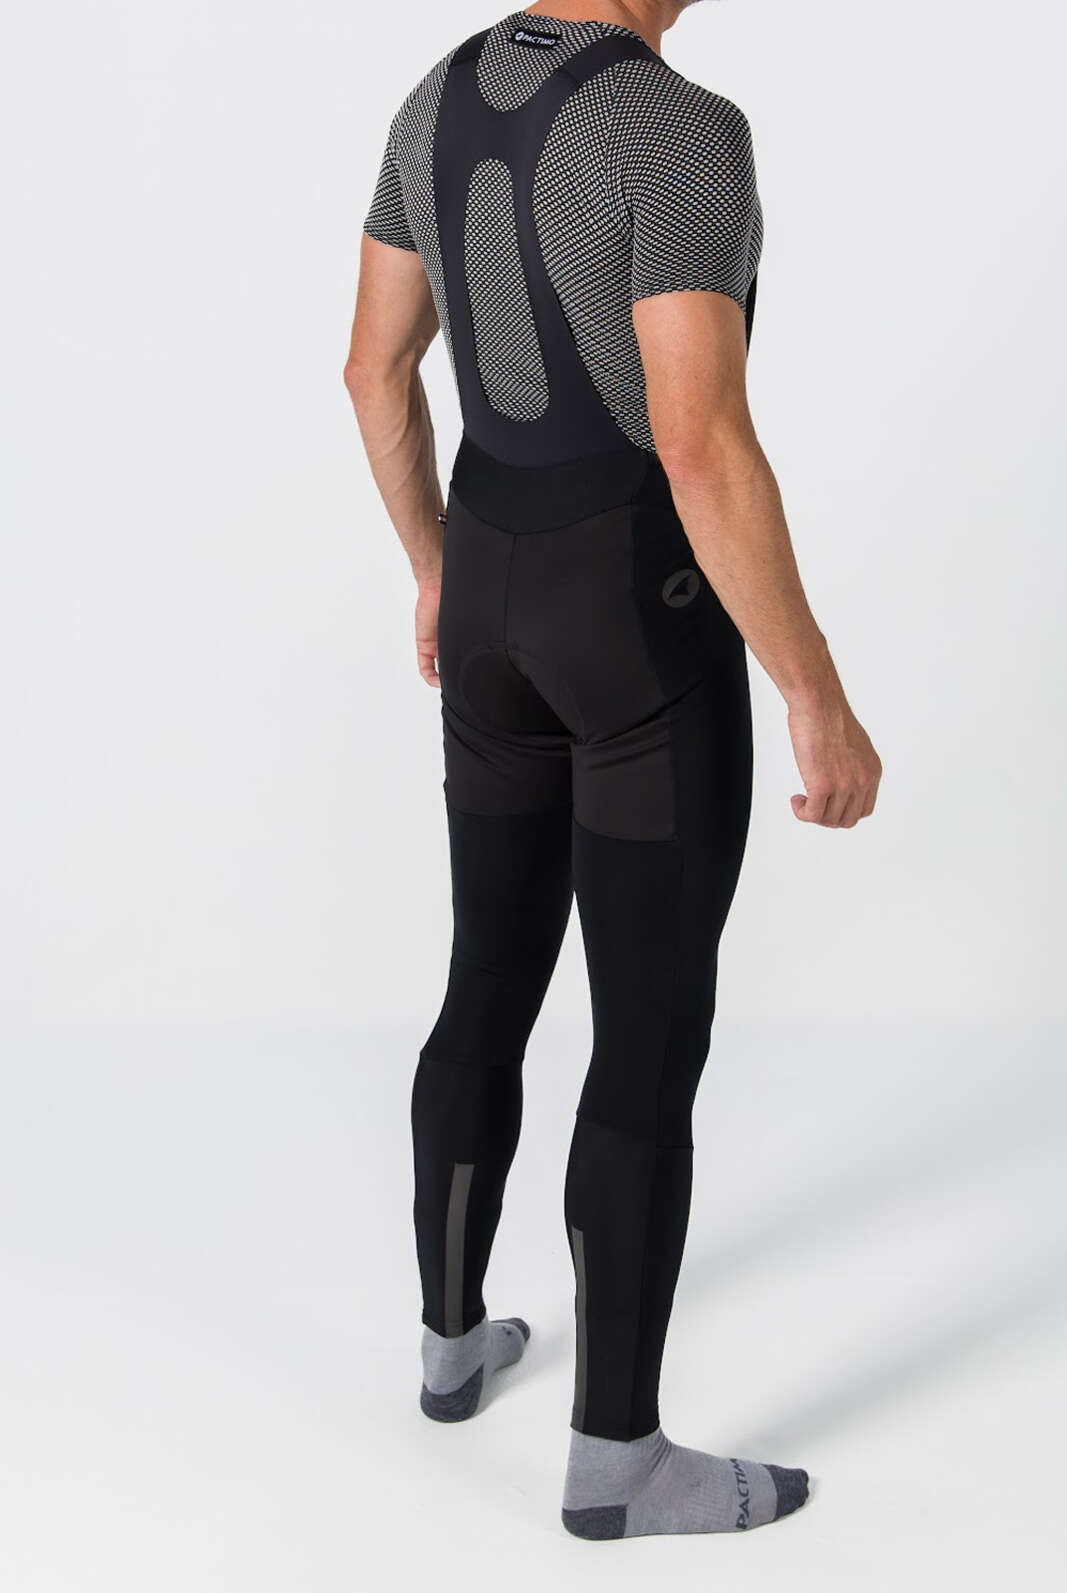 Men's Water-Repelling Thermal Cycling Bib Tights - Back View